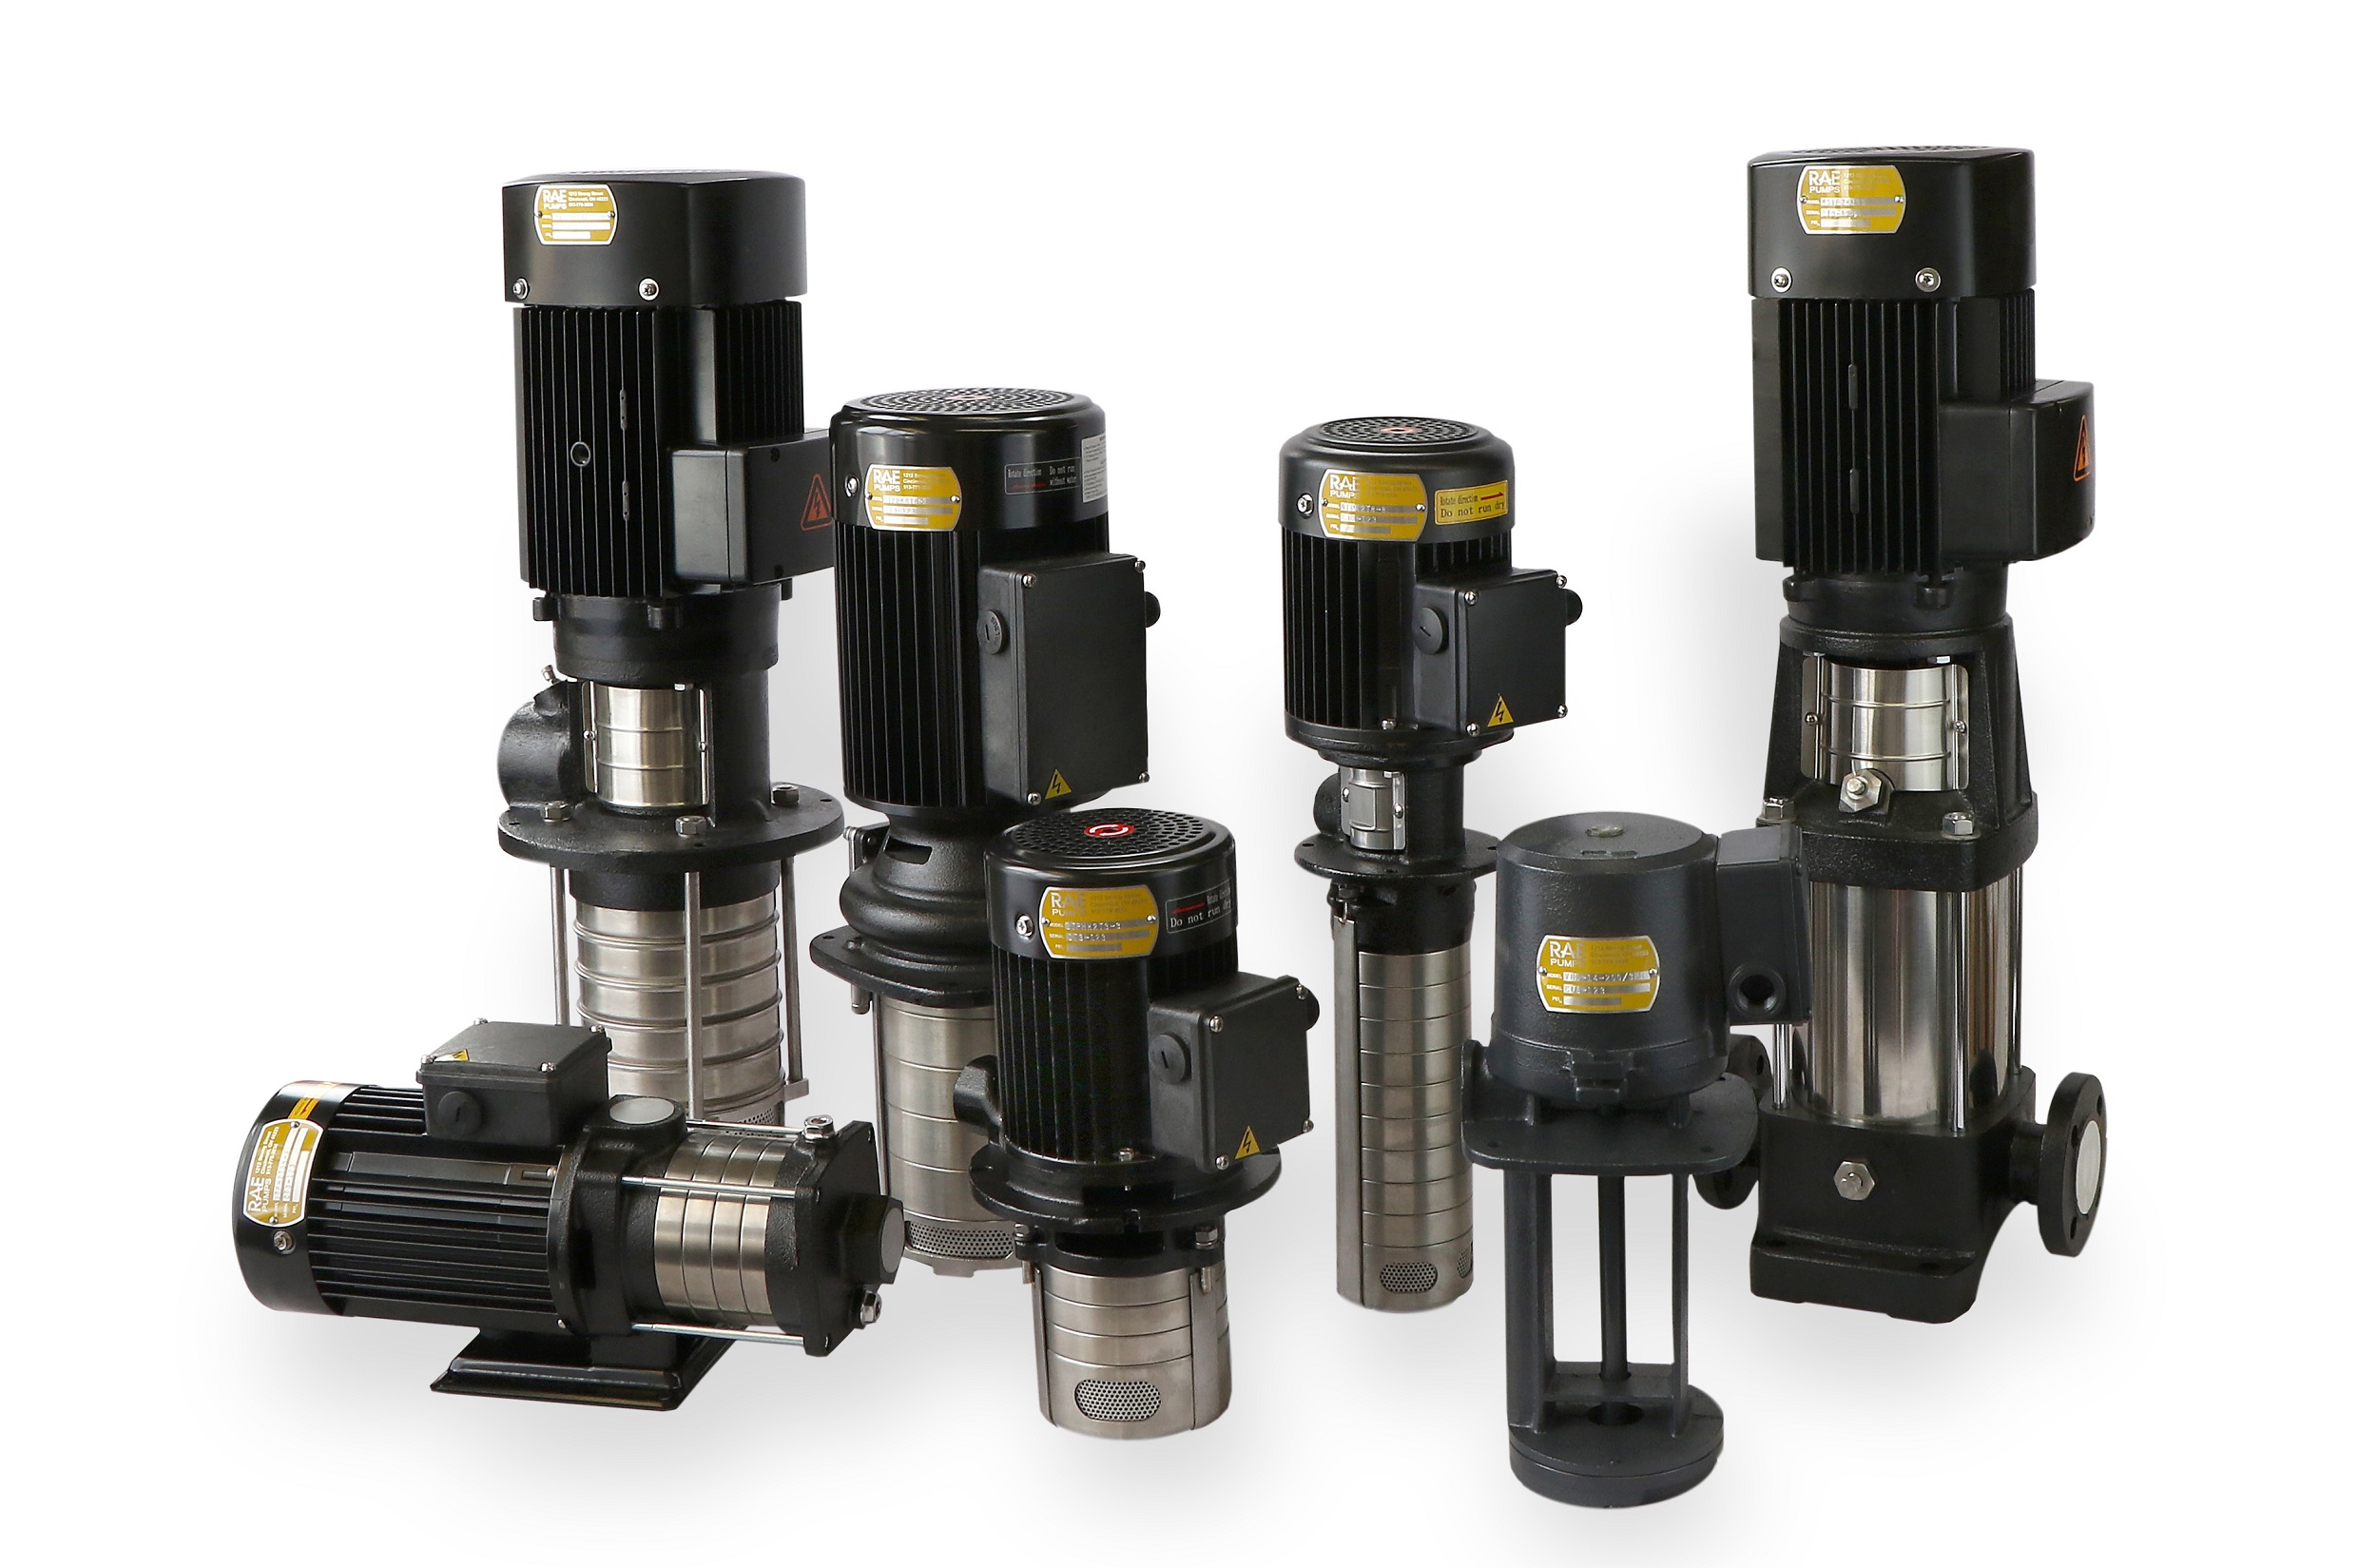 The RAE pump family covers several stock horizontal and vertical pumps that have been rebranded.